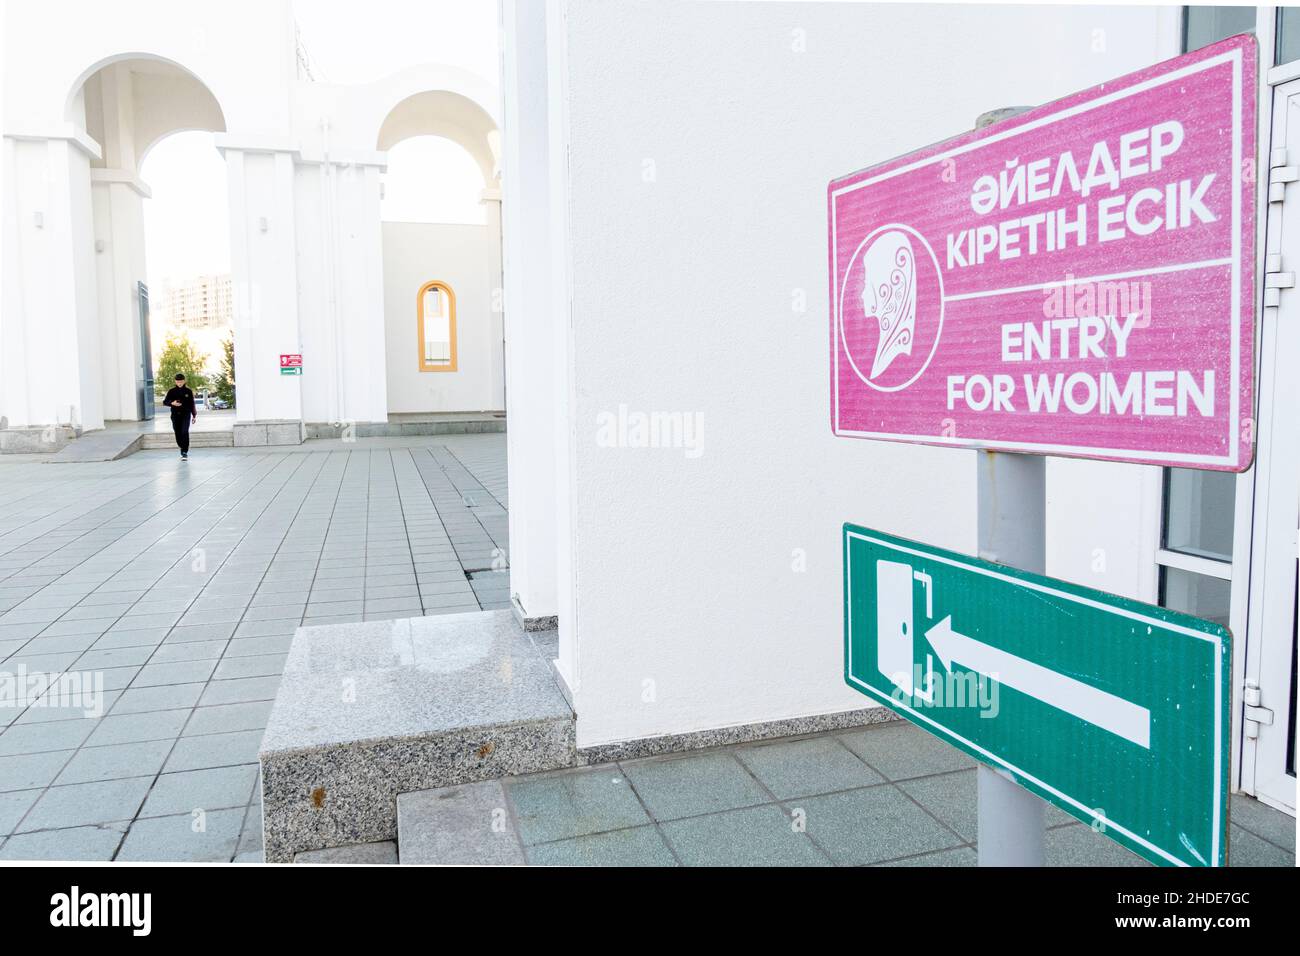 Directional sign showing the entrance only for women in English and Kazakh, entryway to the Mosque in Astana, Nur-Sultan, Kazakhstan, Central Asia Stock Photo